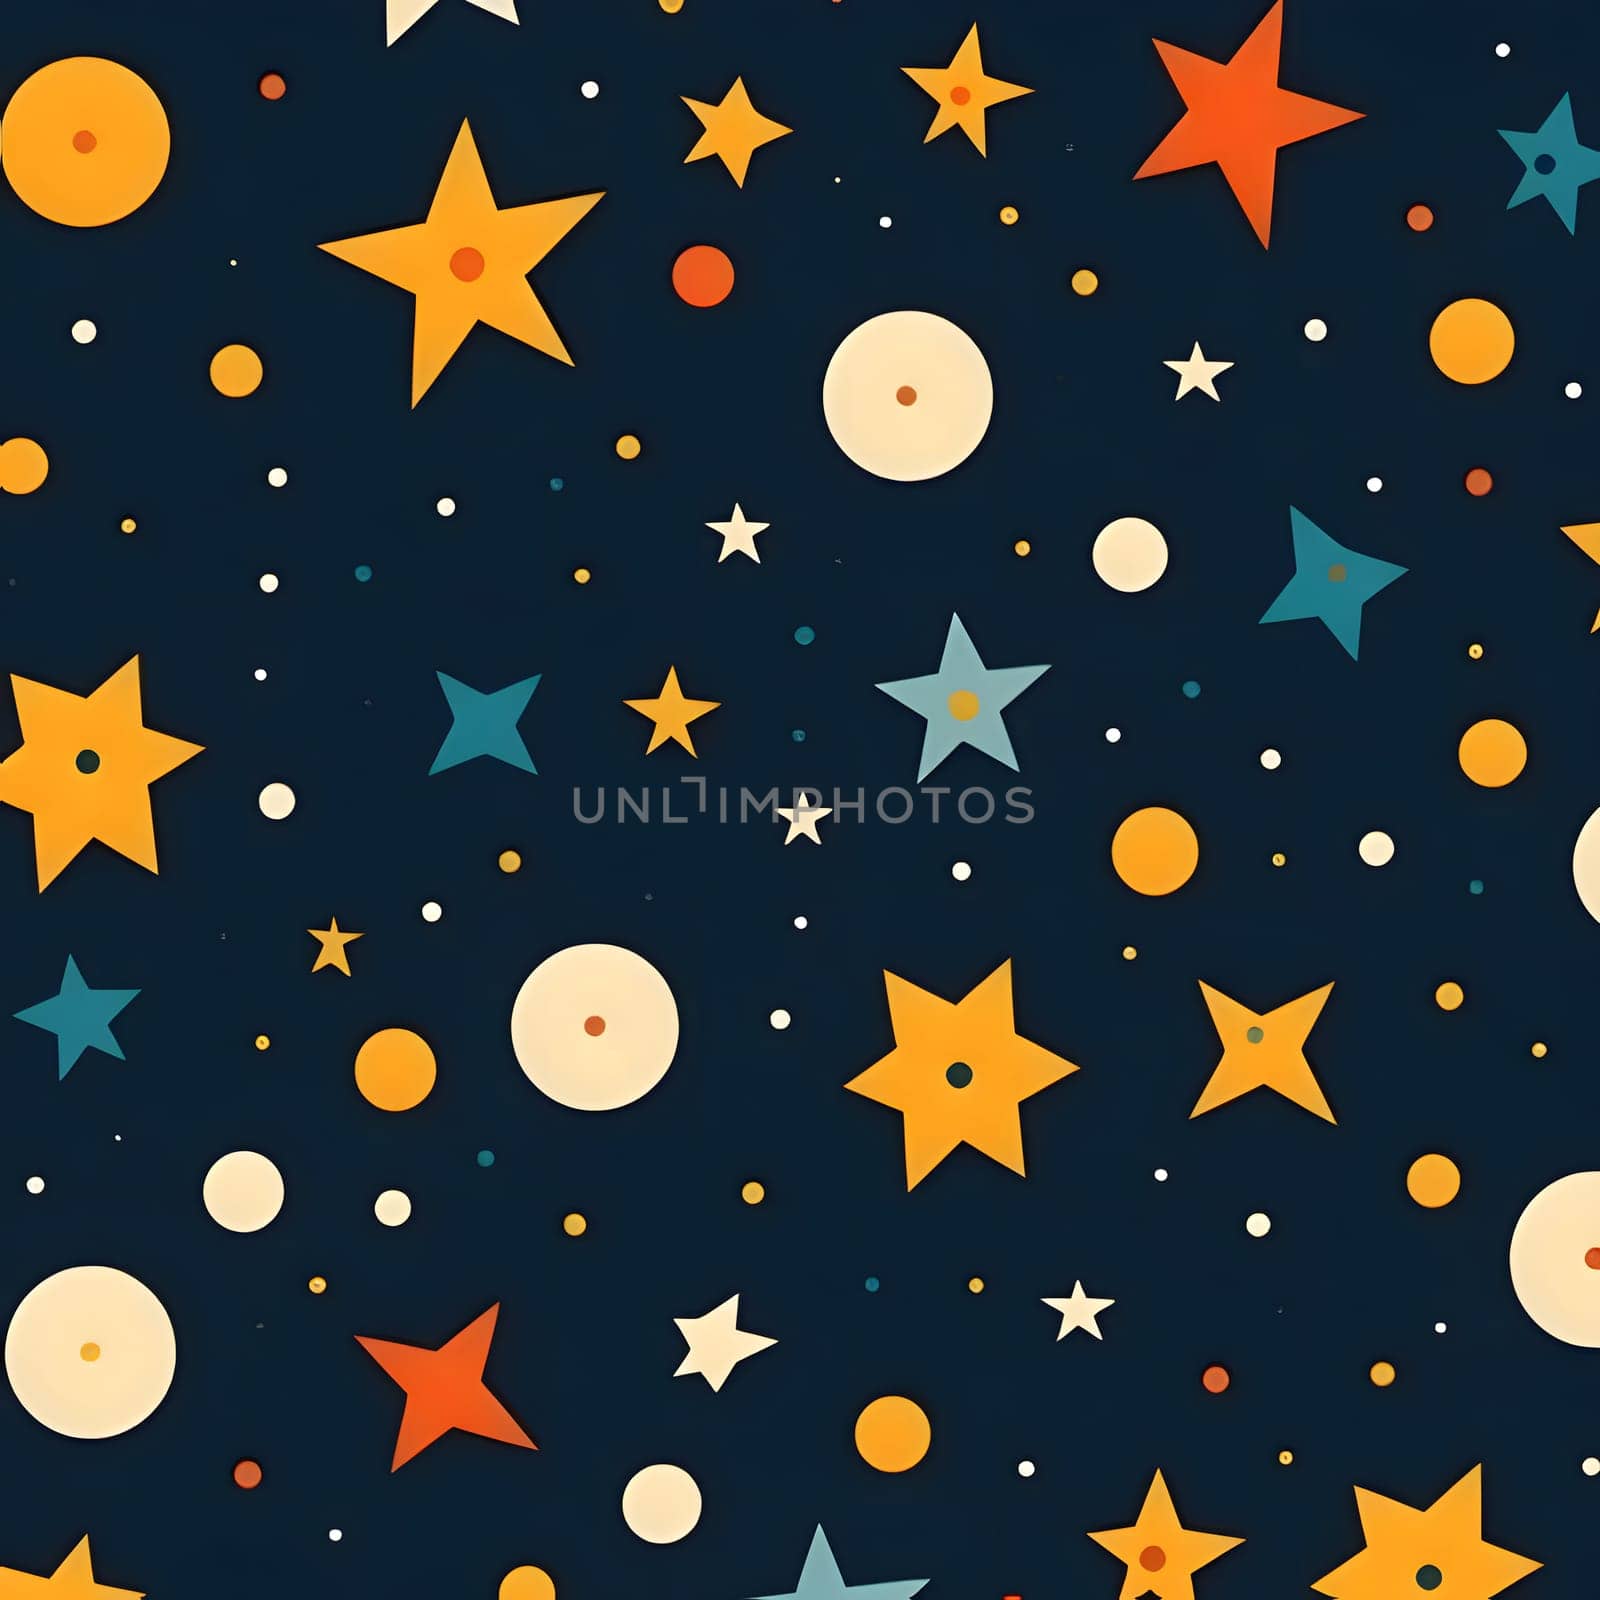 Patterns and banners backgrounds: Seamless pattern with stars and circles. Vector illustration. Eps 10.